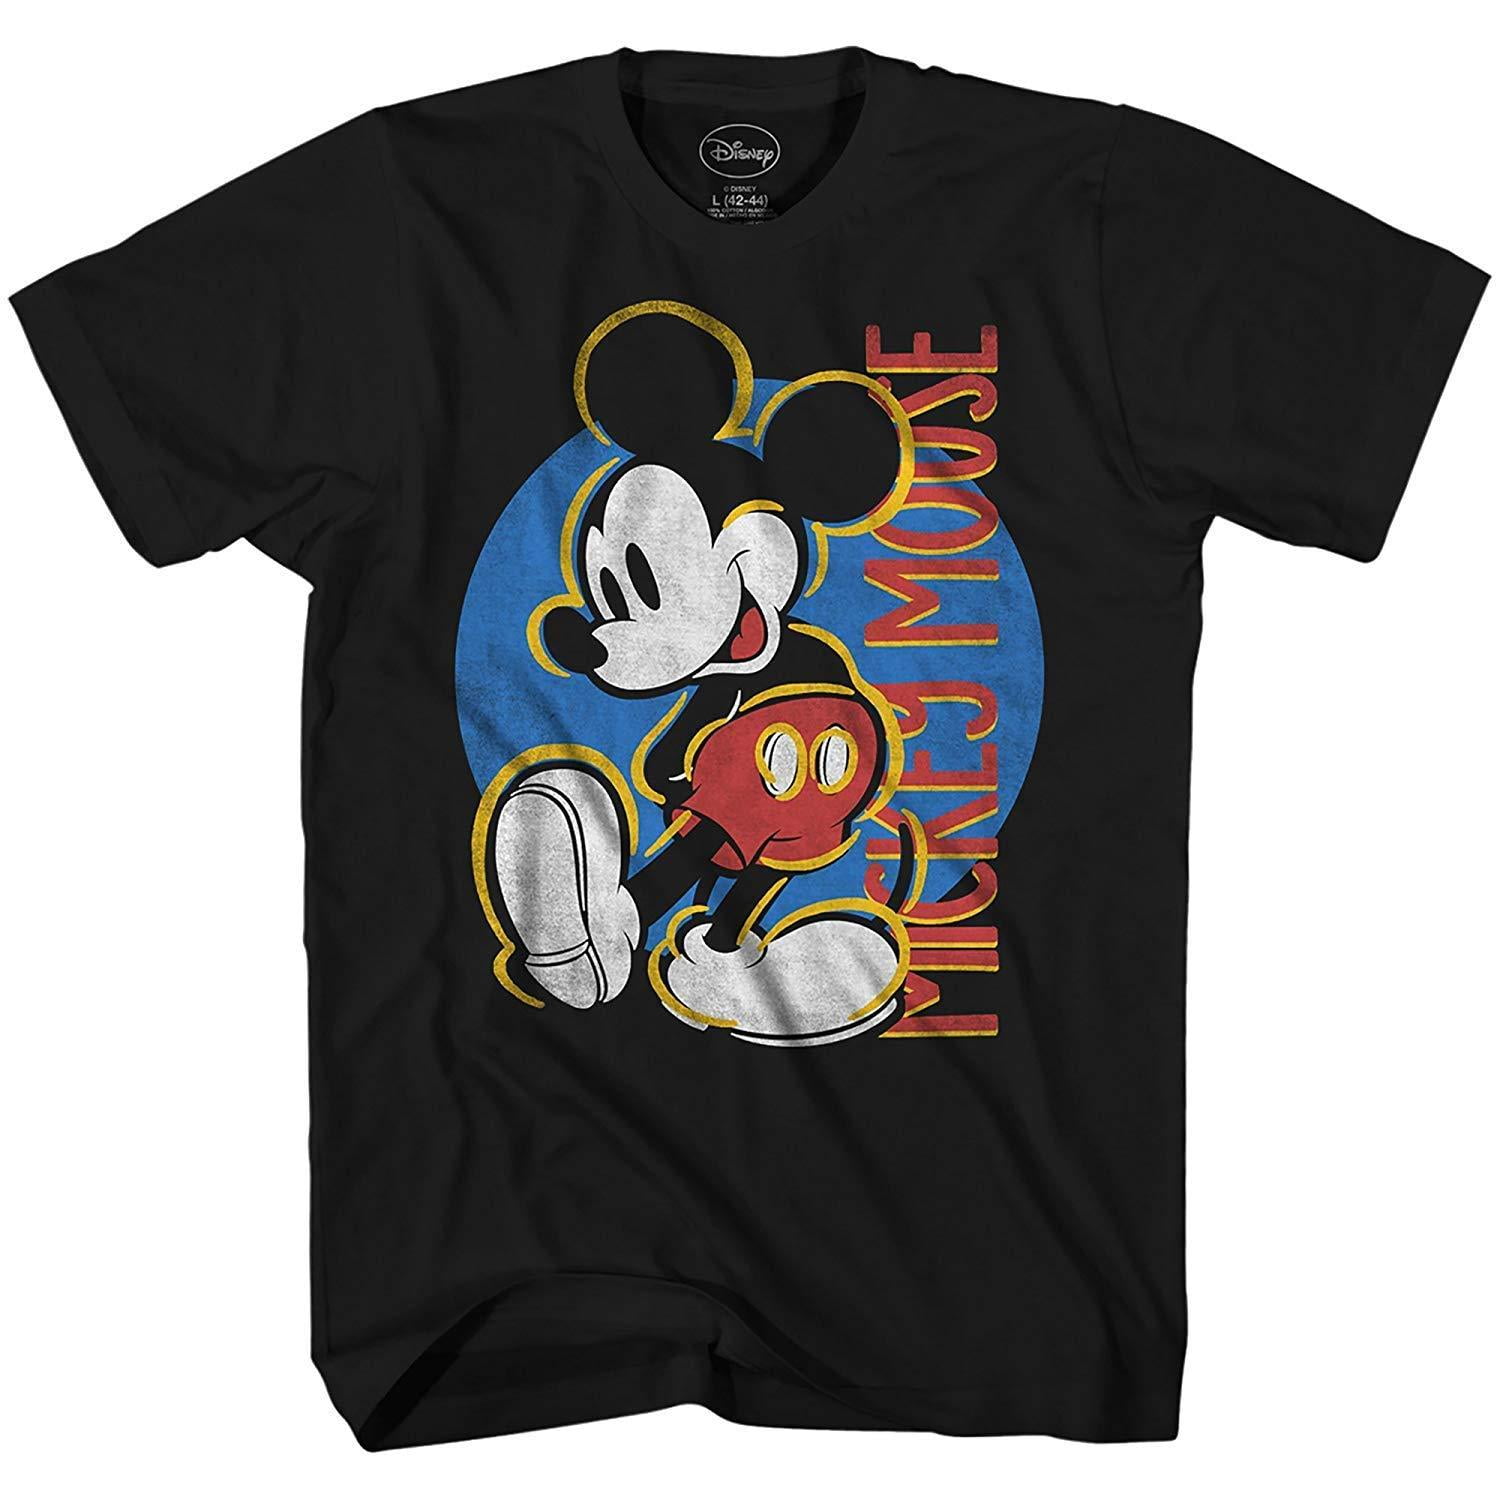 Mickey Mouse Final Touches Disneyland Disney World Tee Funny Humor Adult Mens Graphic T-shirt 